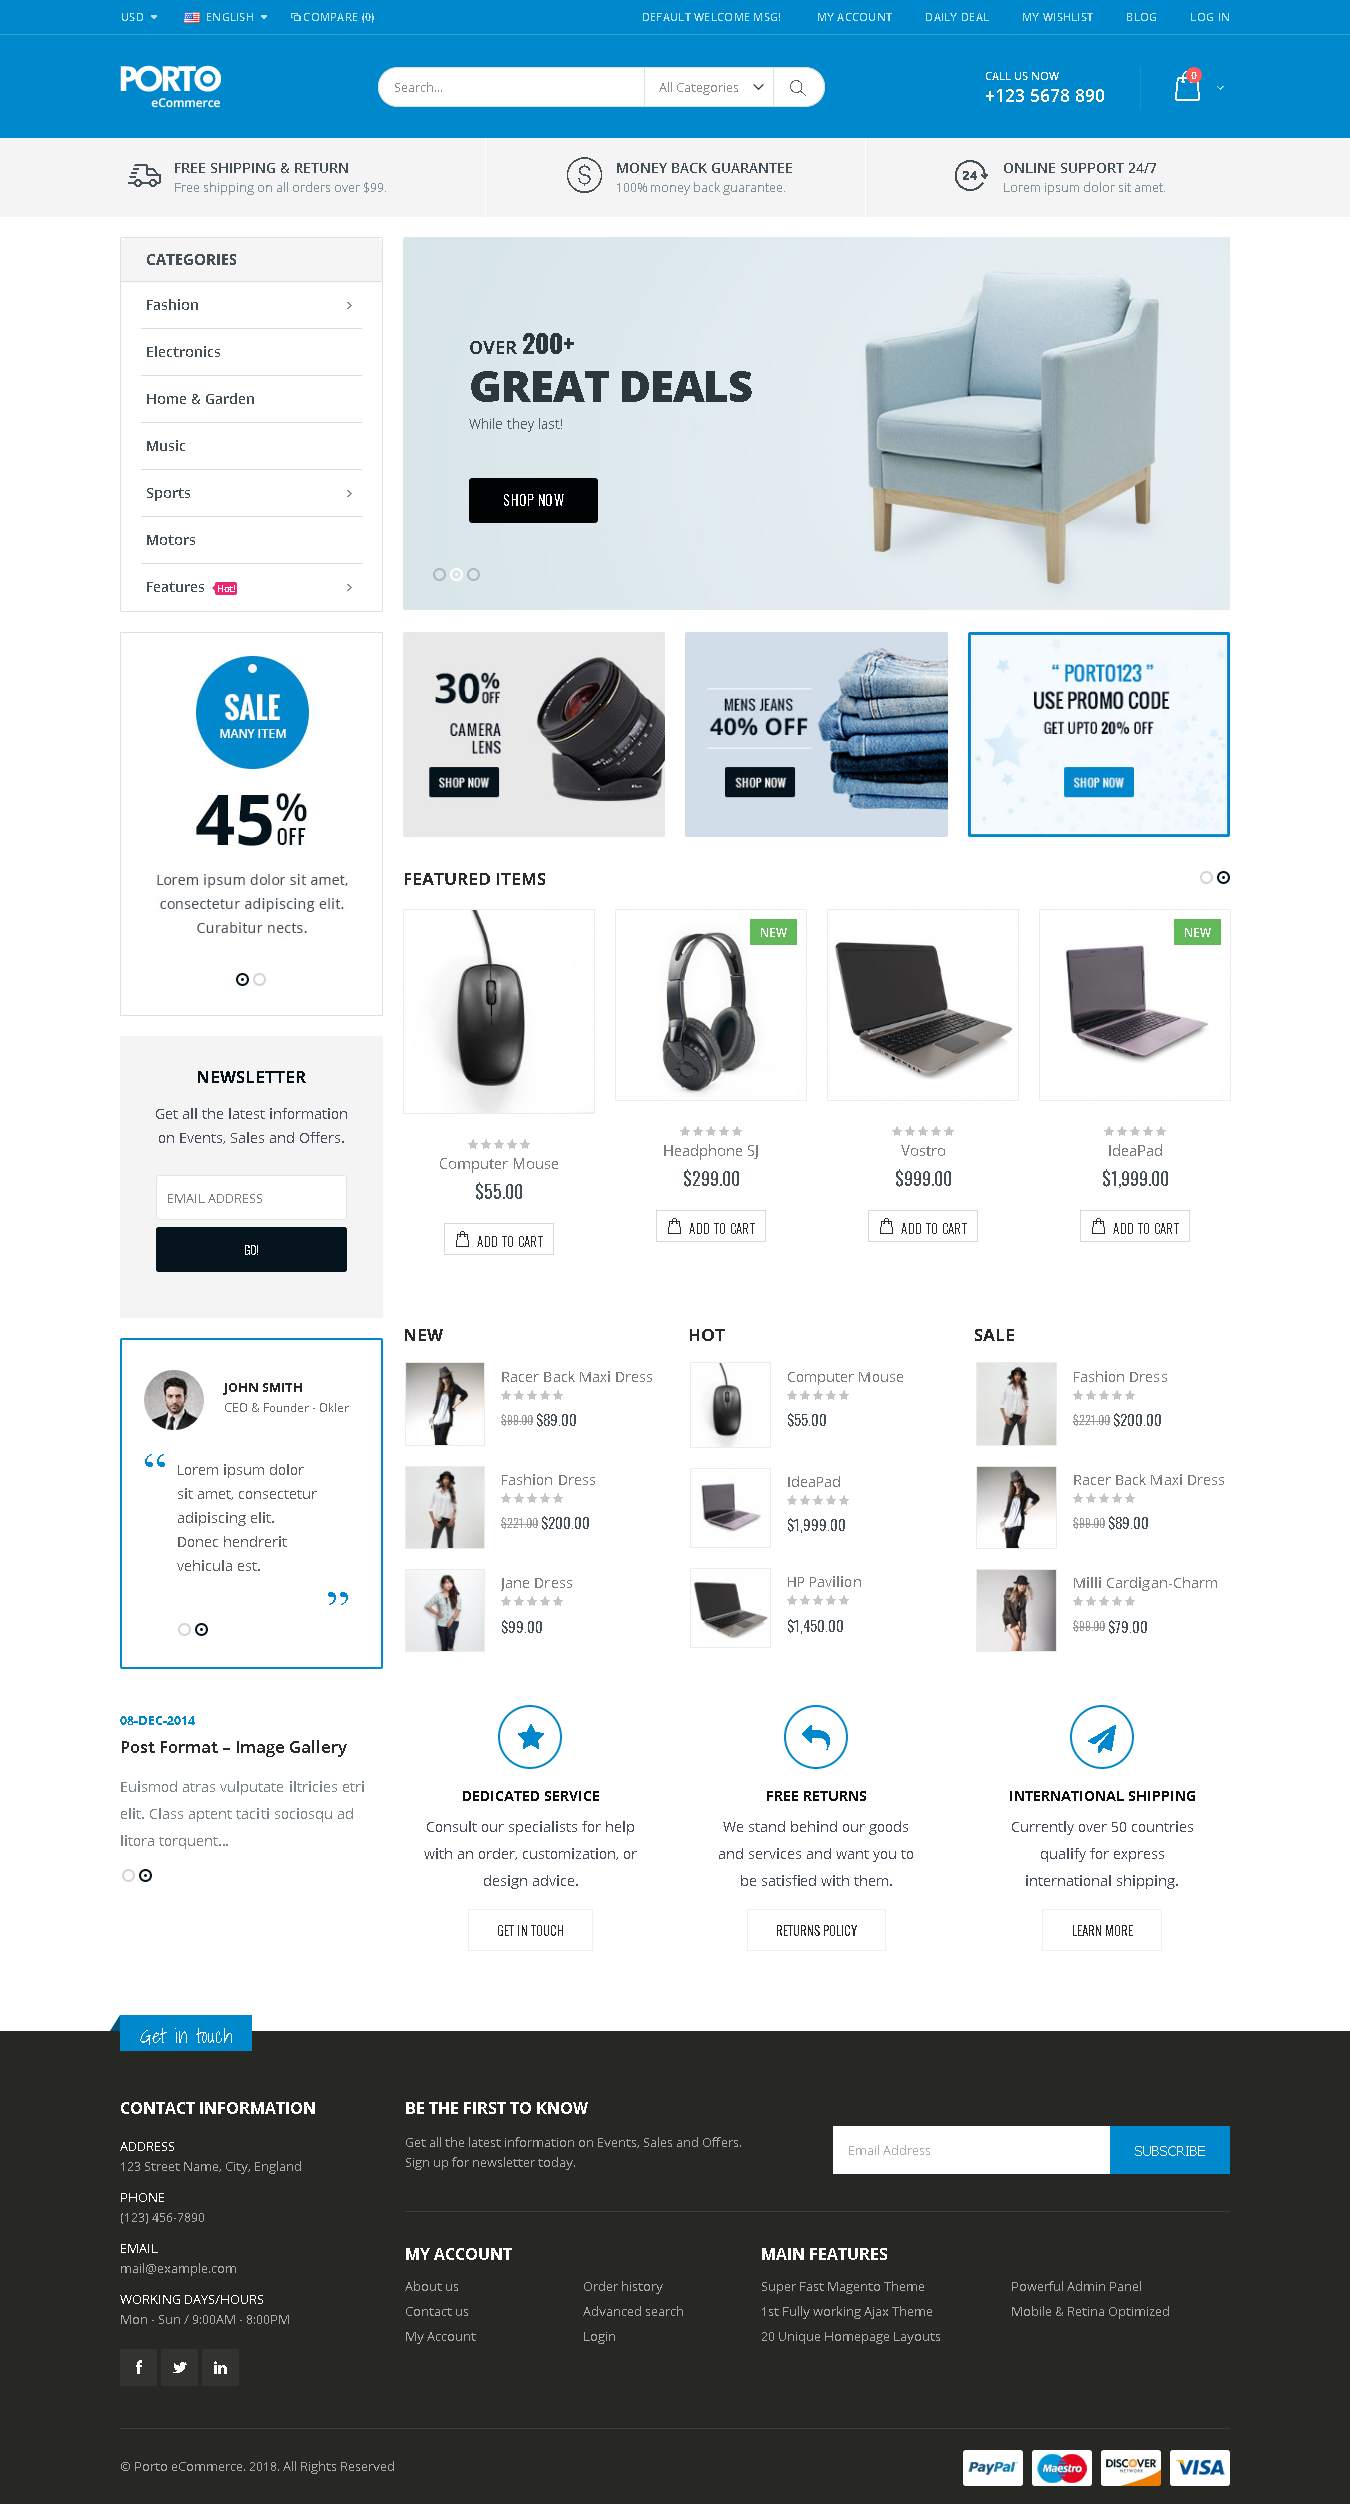 Top 5 Magento Themes for Large Inventory Stores - Porto- Ultimate Responsive Magento Theme